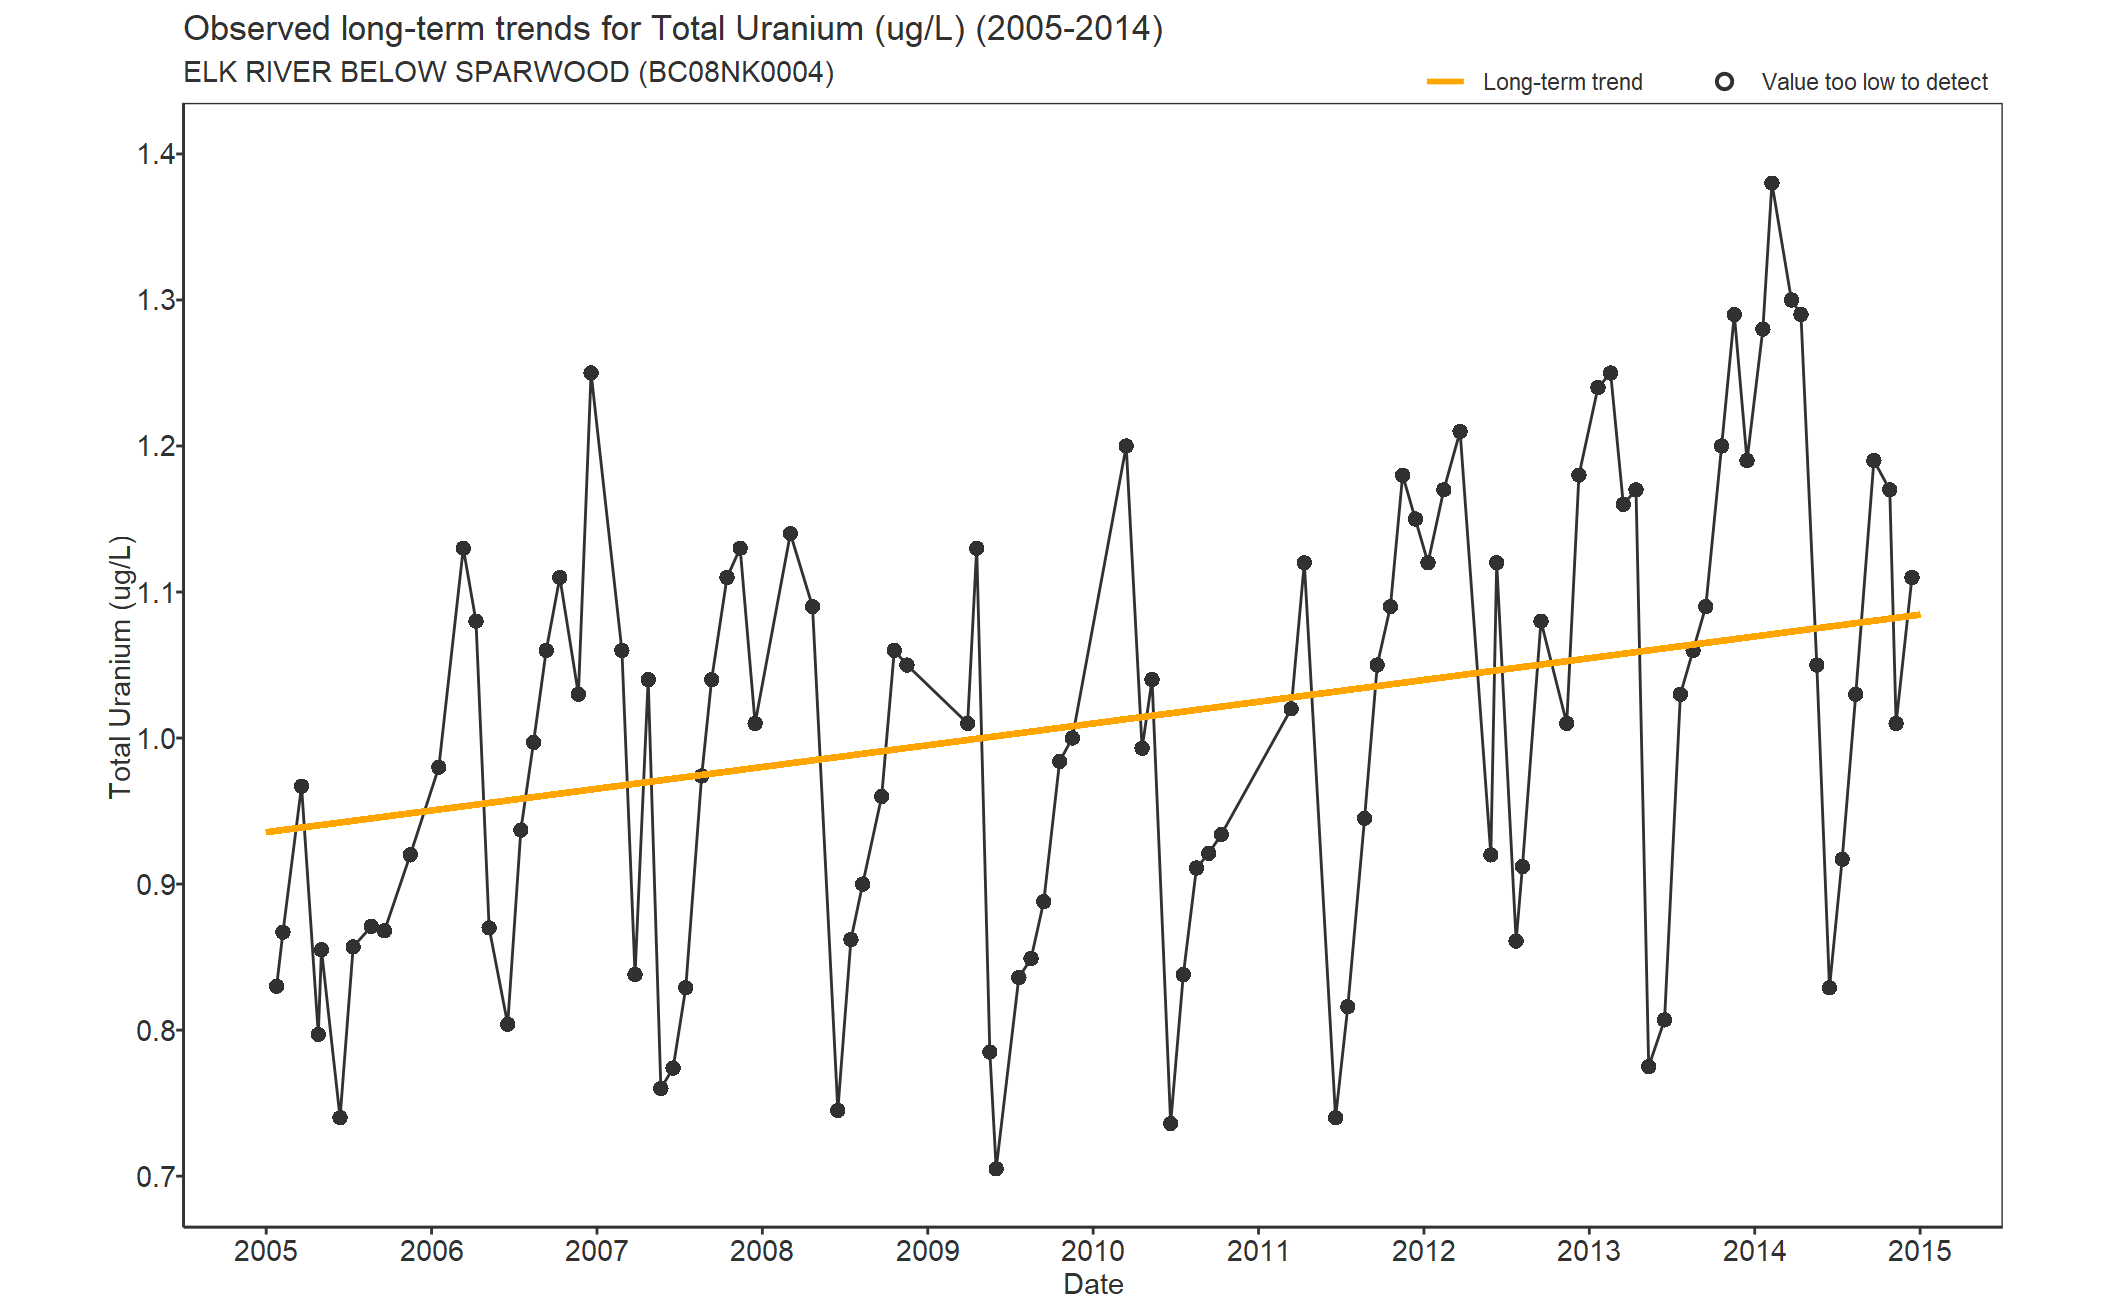 Observed long-term trends for Uranium Total (2005-2014)